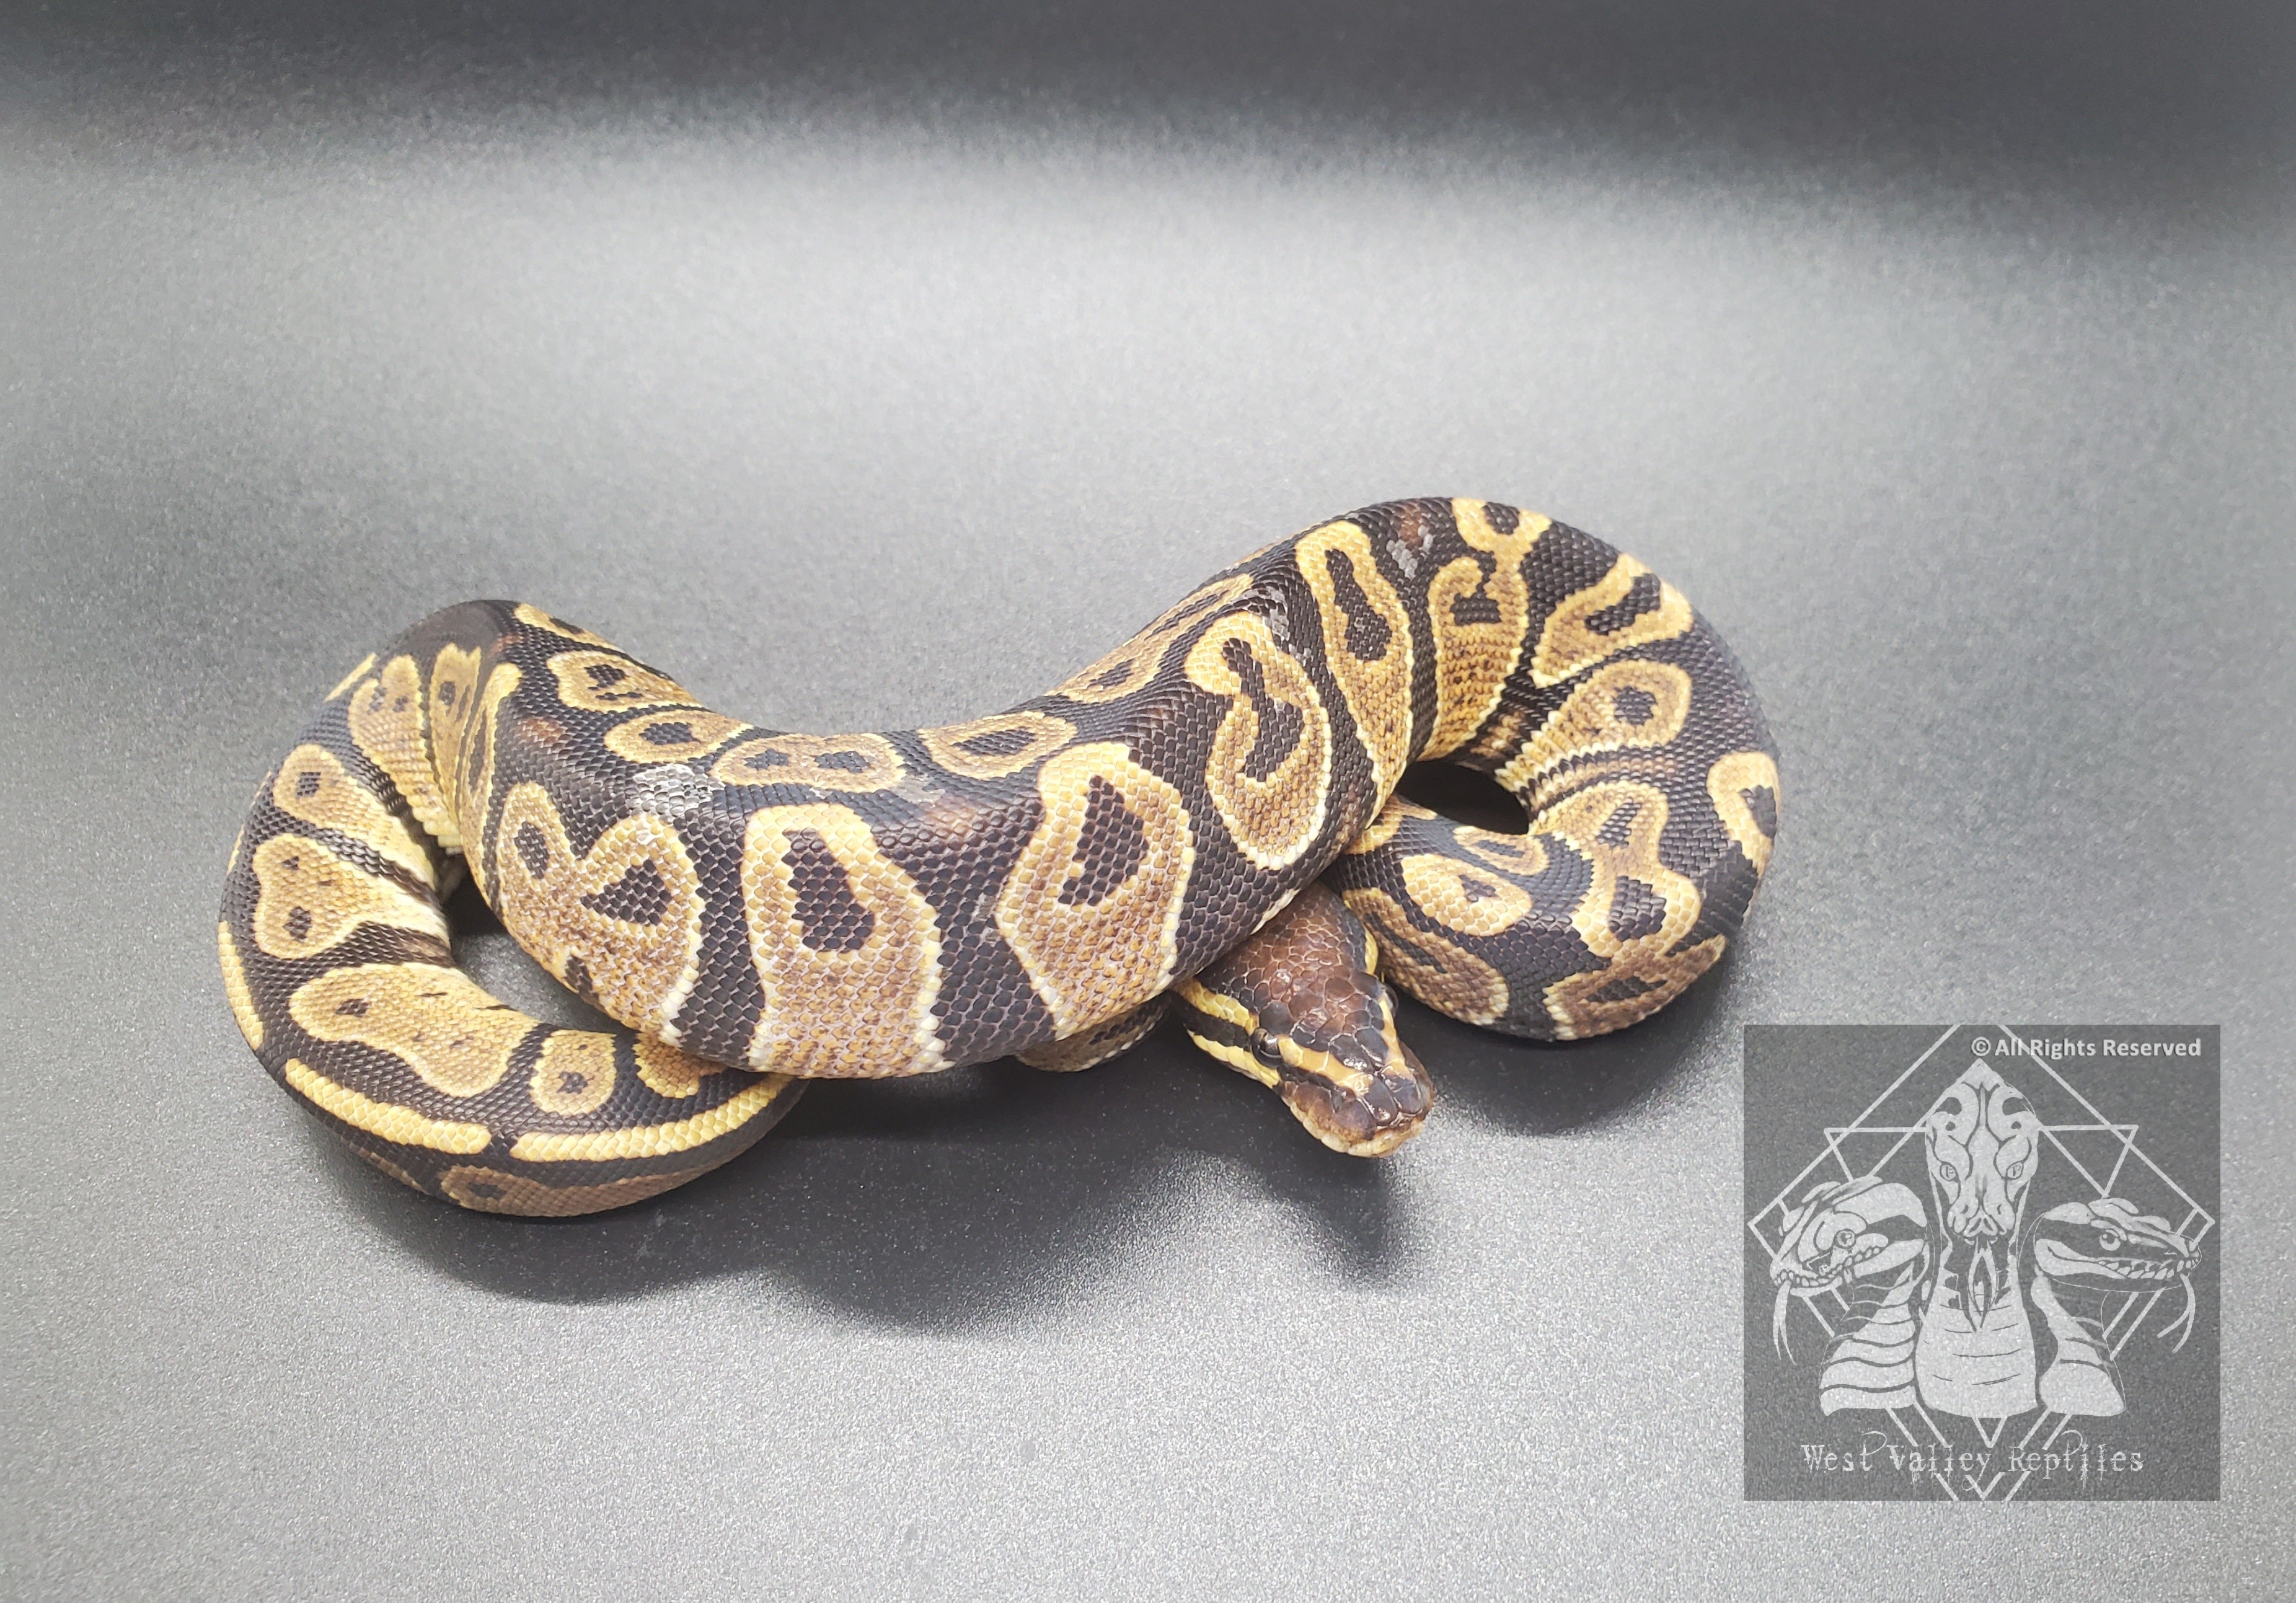 Shredder Ball Python by West Valley Reptiles